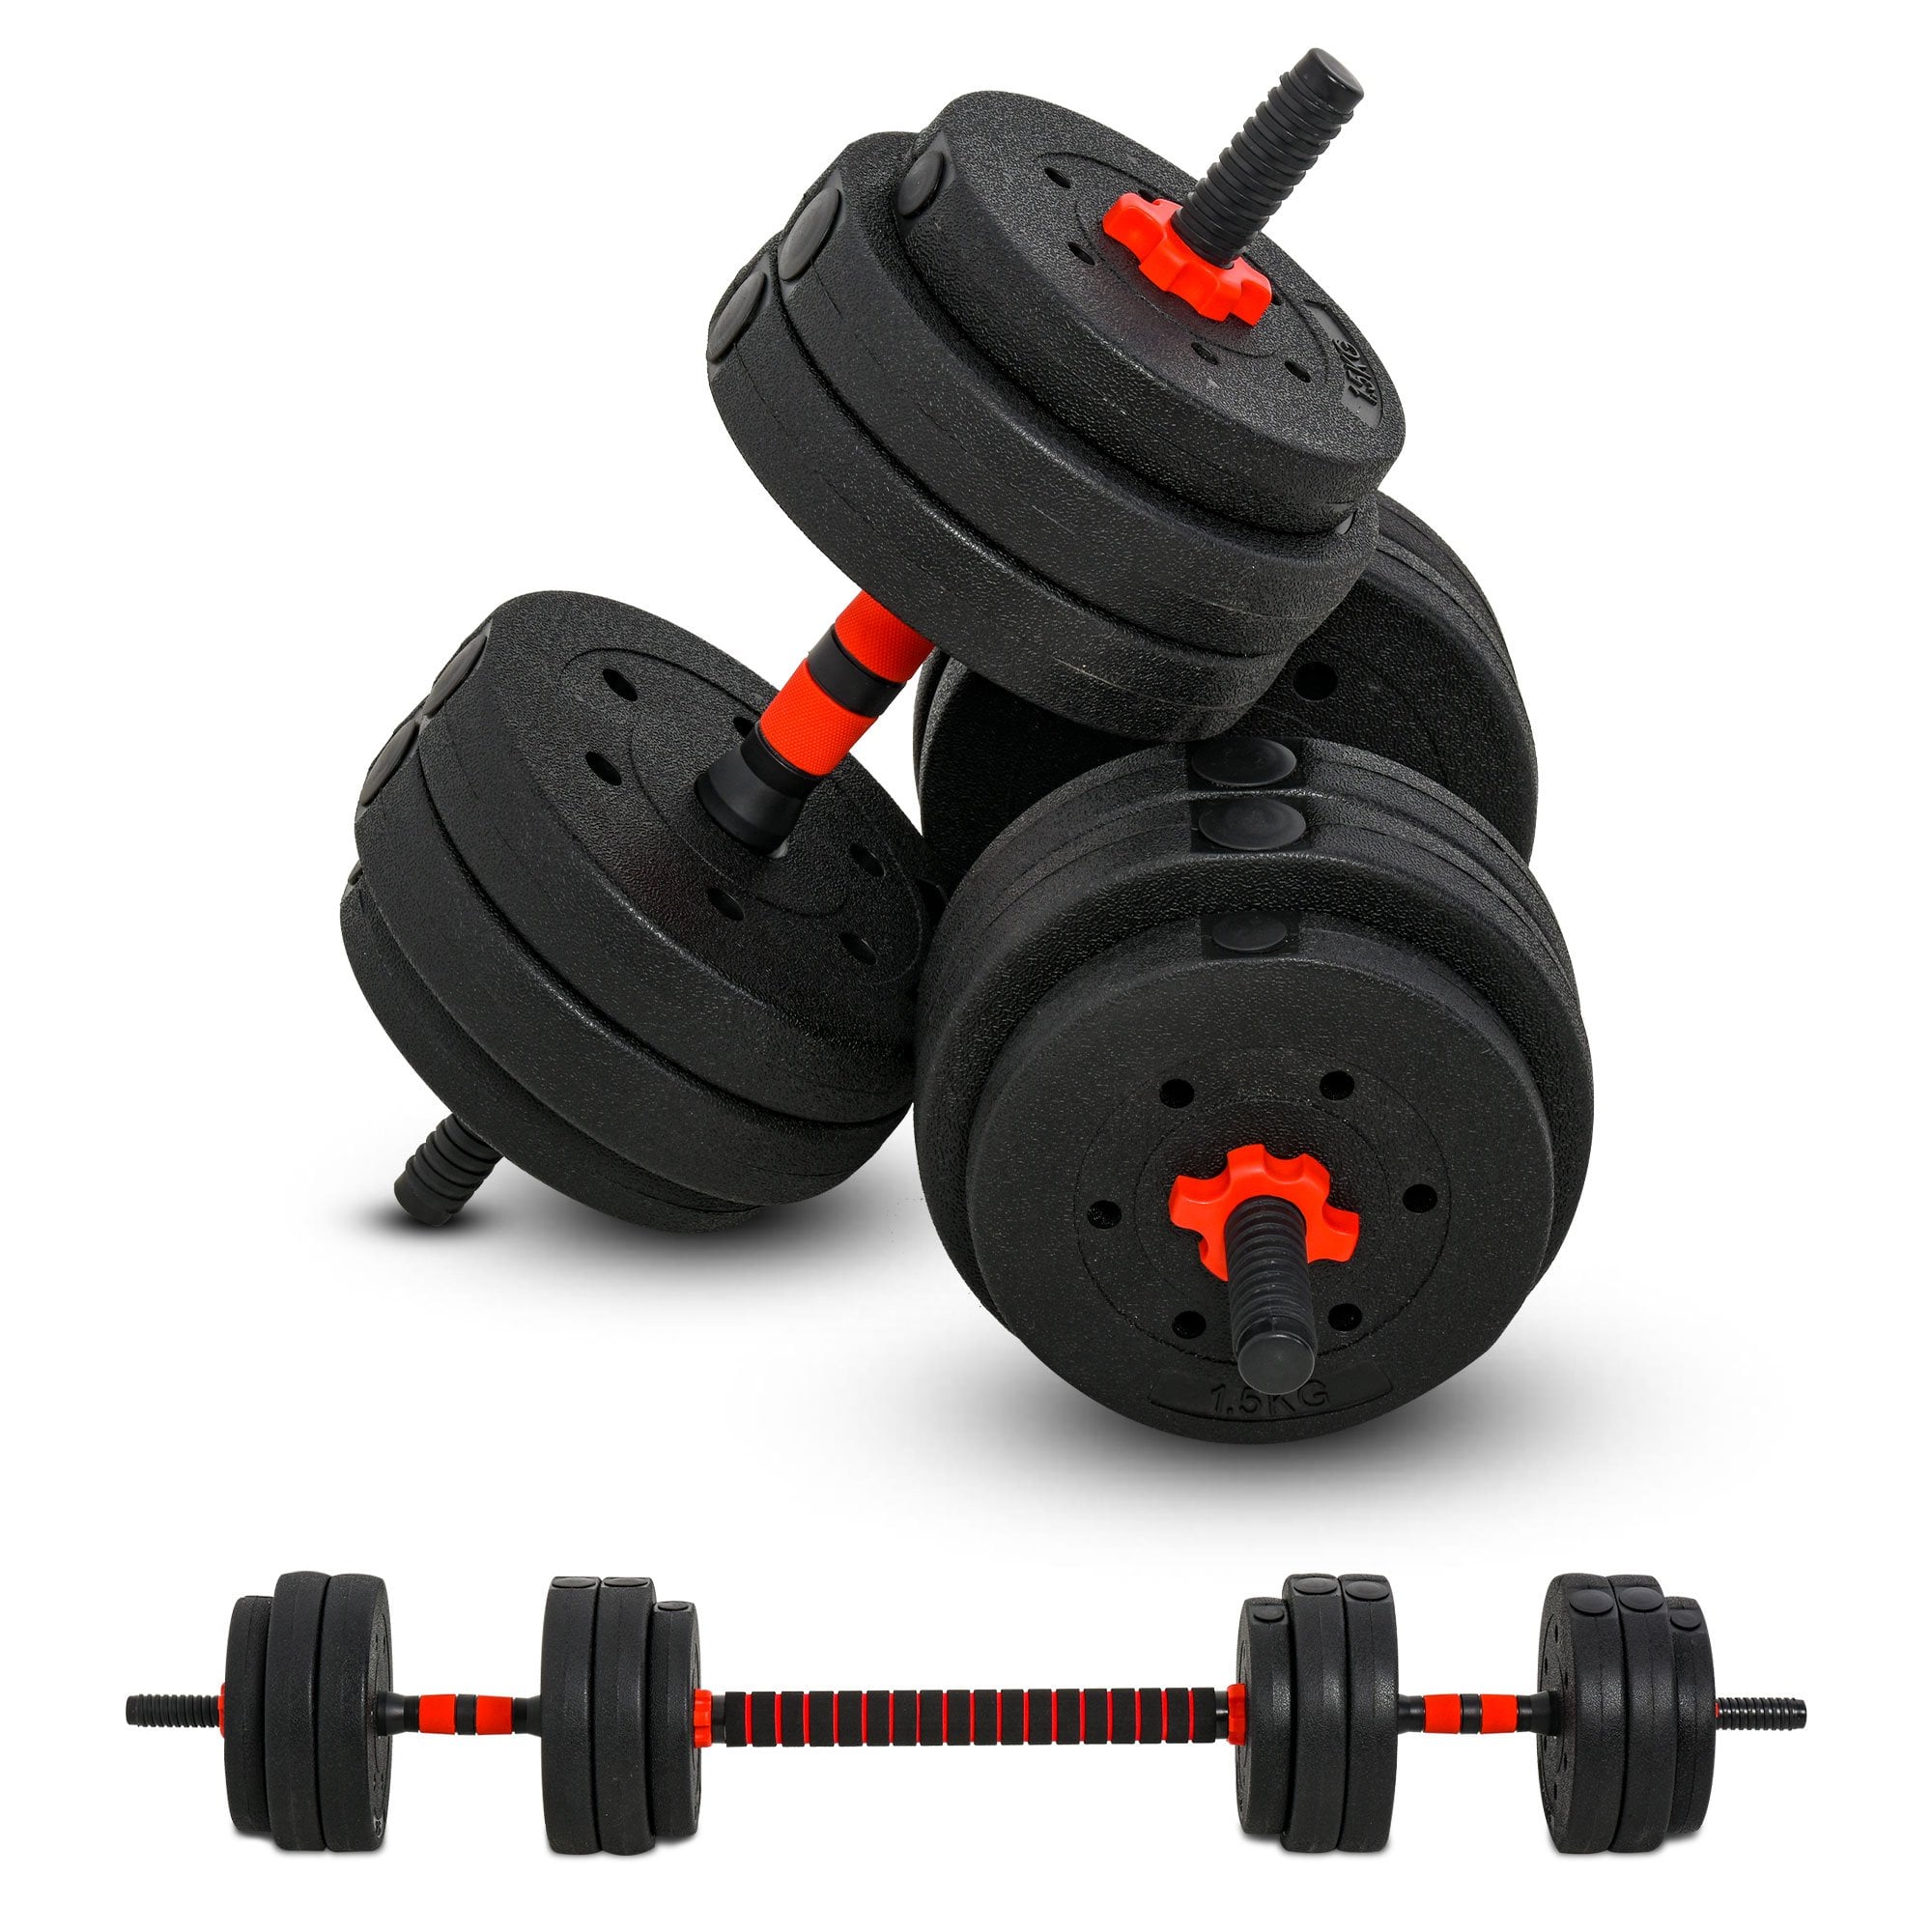 25kg 2 IN 1 Adjustable Dumbbells Weight Set - Dumbbell Hand Weight Barbell for Body Fitness - Lifting Training for Home - Office - Gym - Black Set Fit